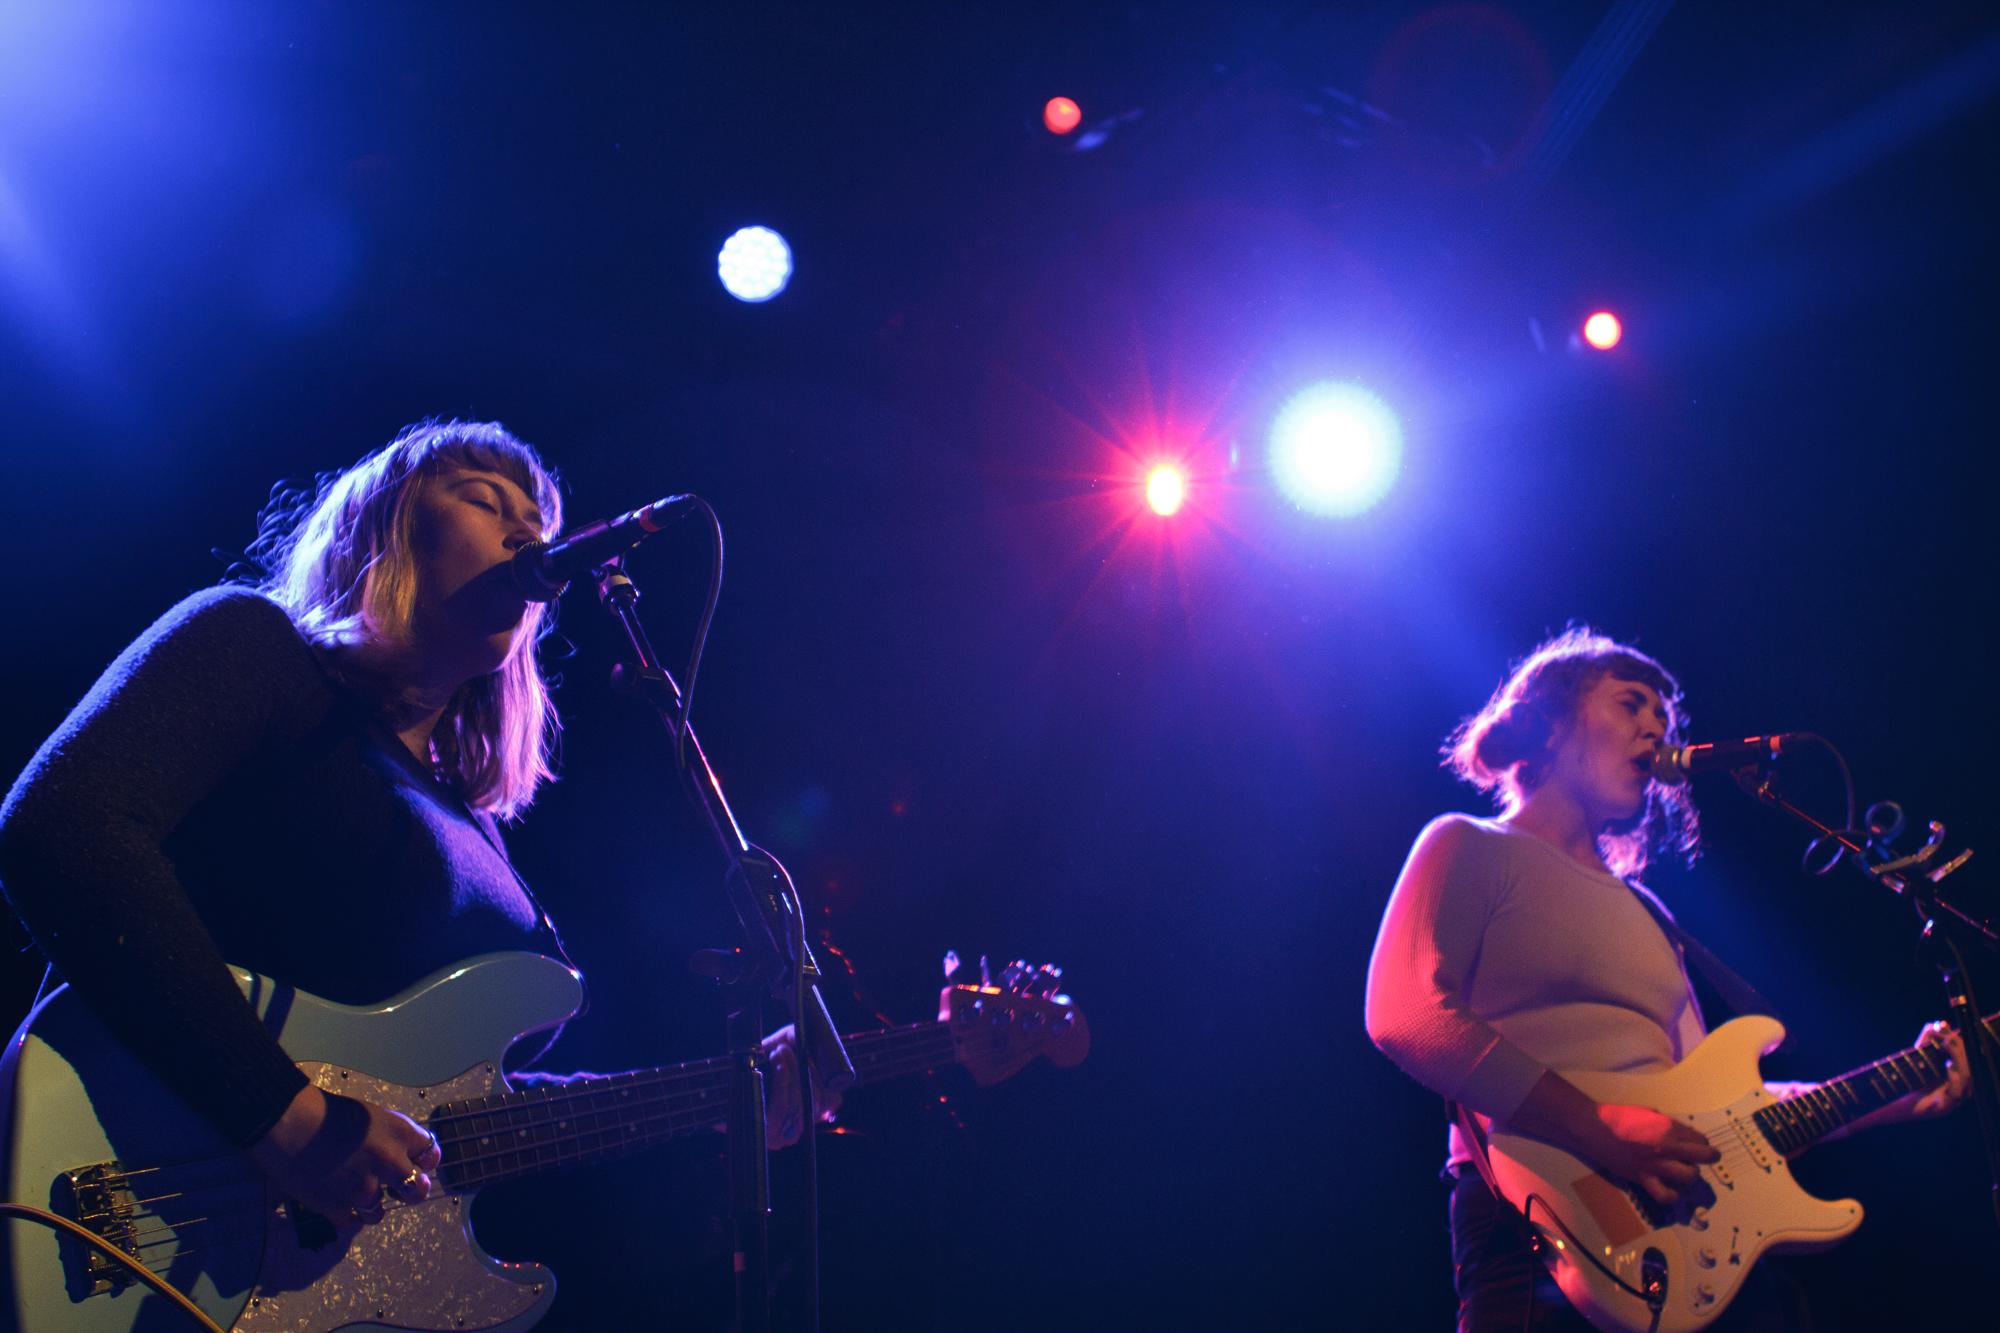 Girlpool plays at Music Hall Of Williamsburg in Brooklyn, NY on April 9, 2015. (© Michael Katzif - Do not use or republish without prior consent.)